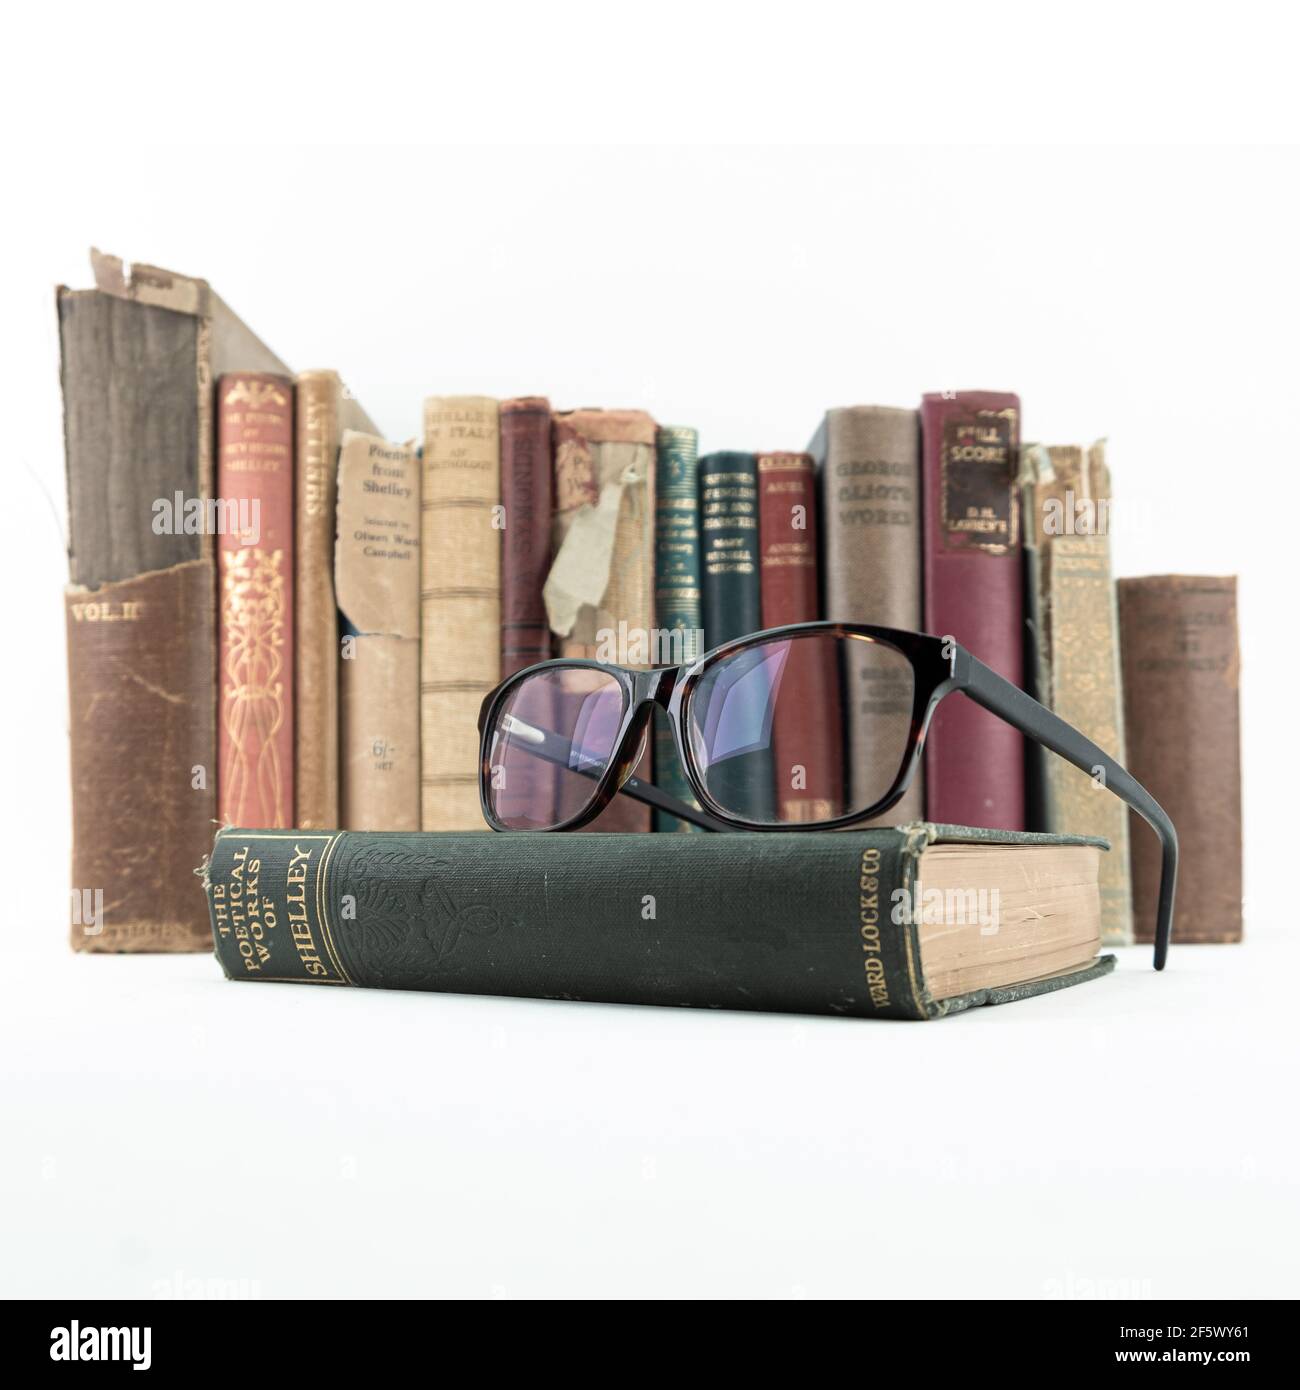 Rare old Vintage books from library Shelley poems, top of an old eyewear glasses on white background Stock Photo